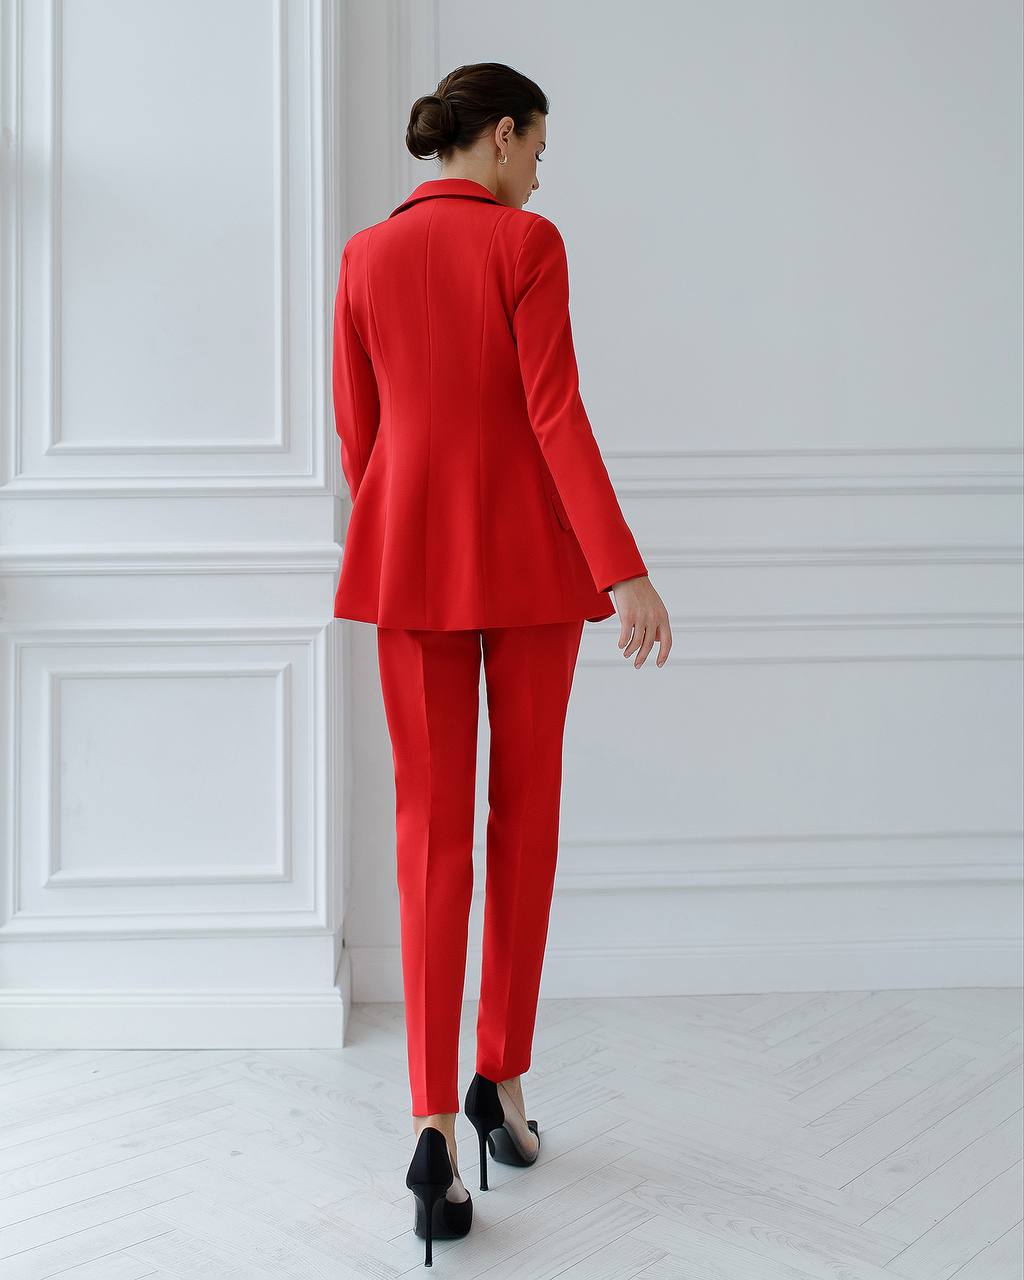 a woman in a red suit and high heels